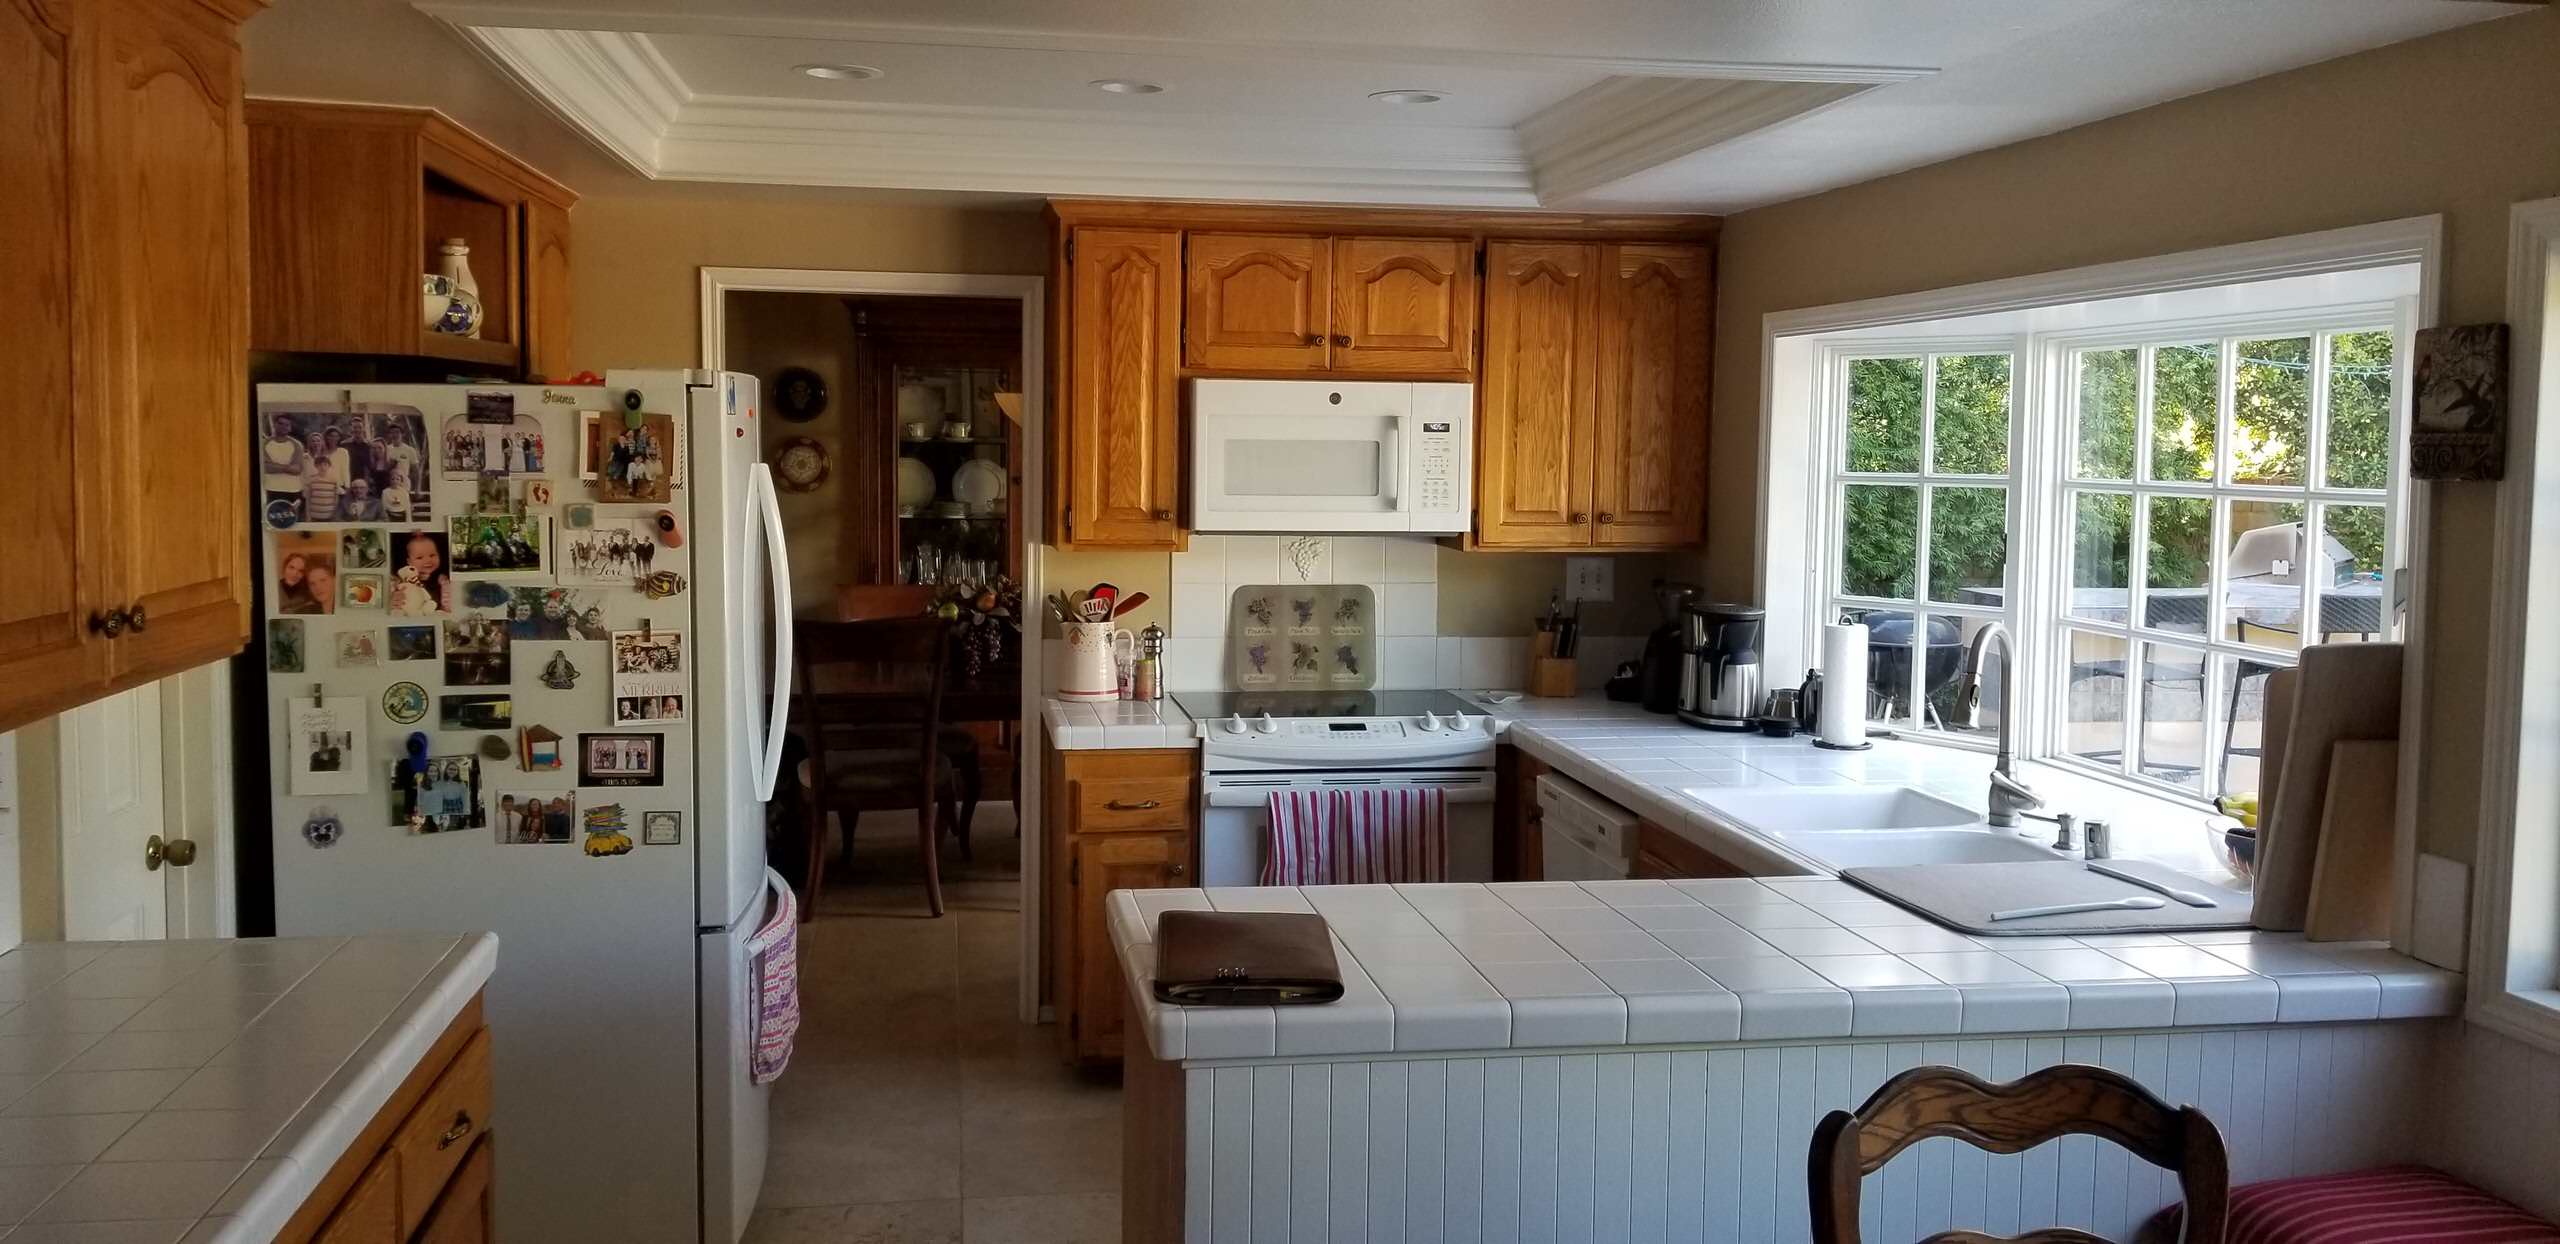 Whole House Remodel, Mission Viejo CA